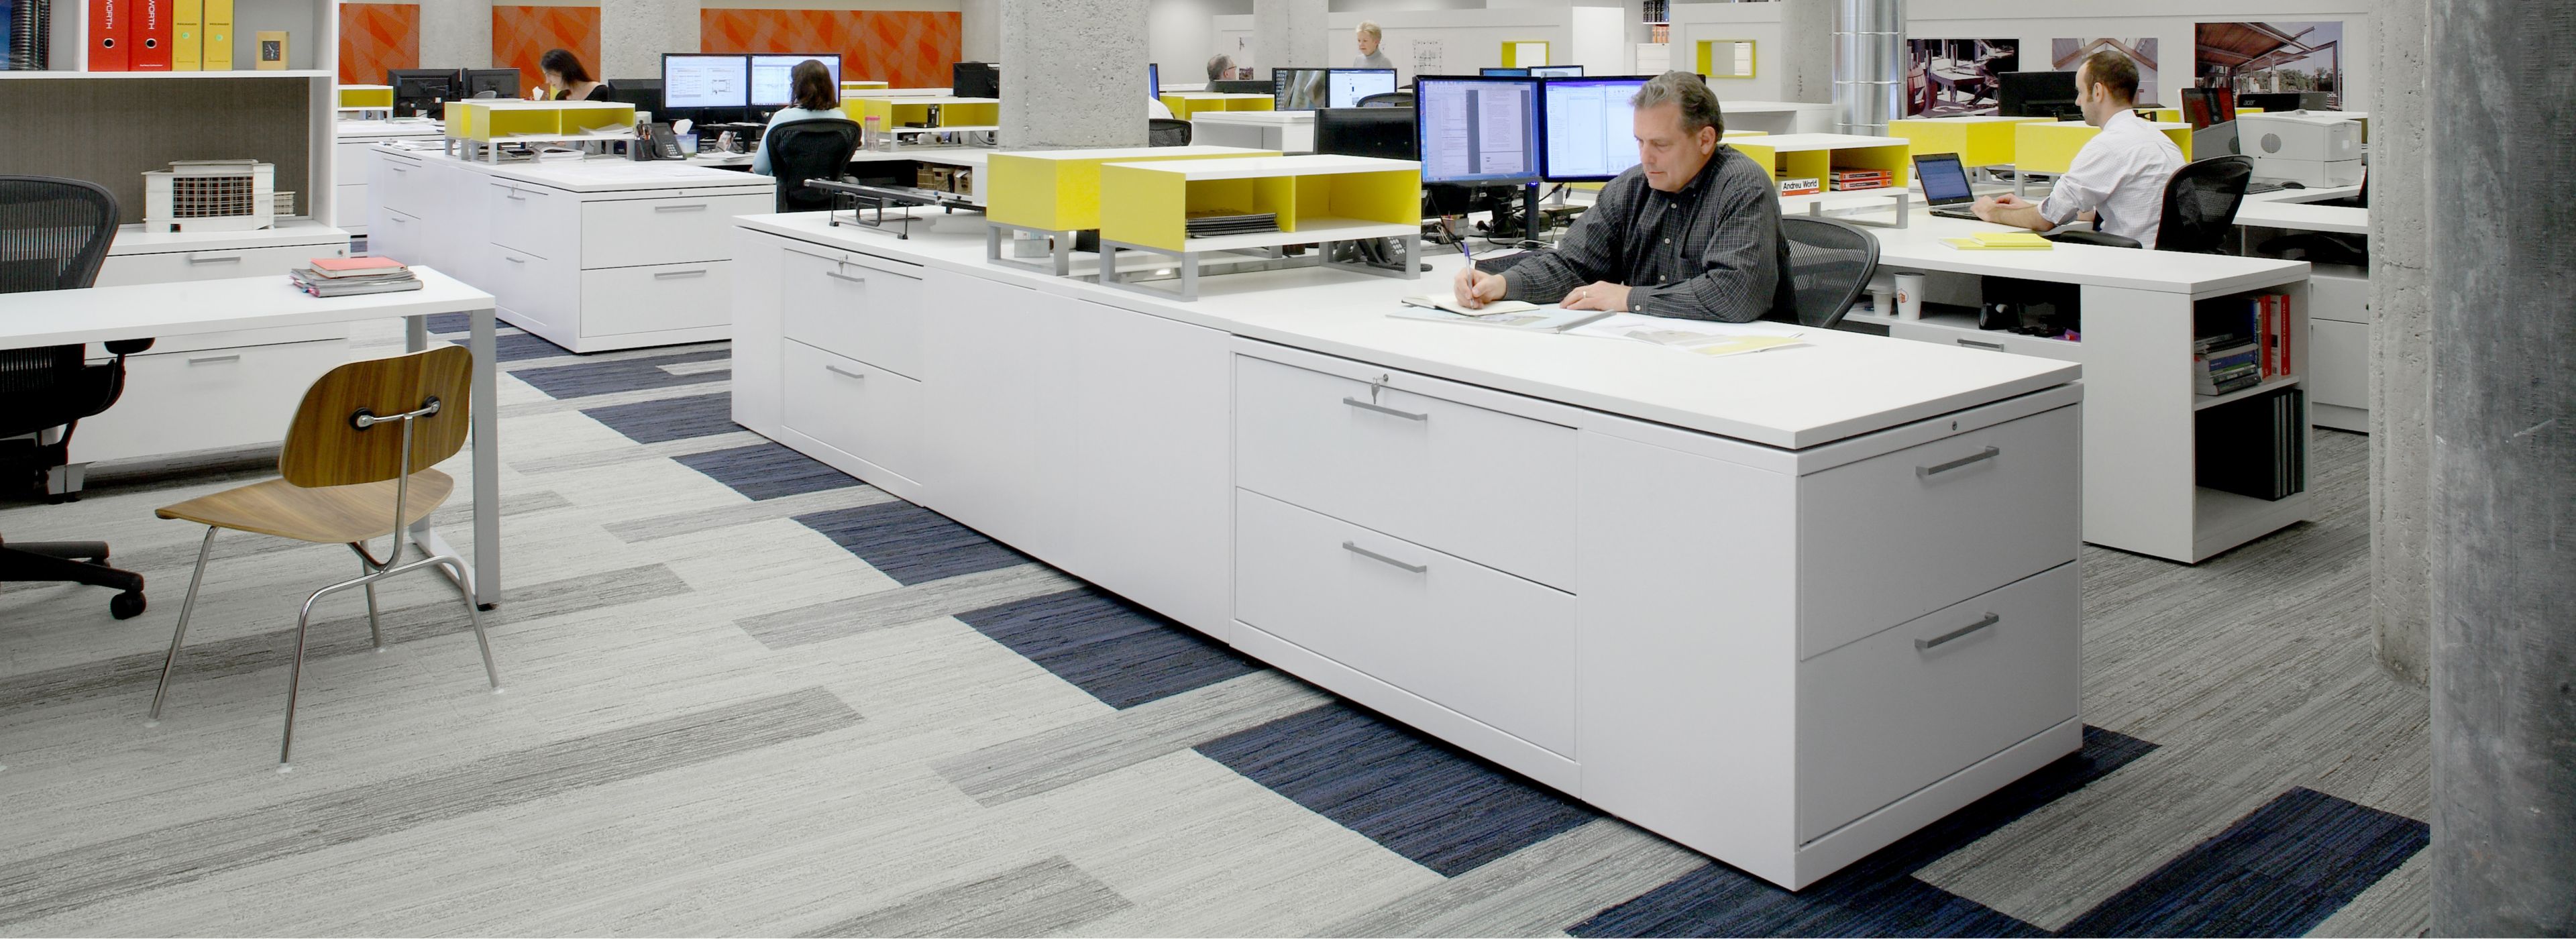 Interface Permian carpet tile in open office with men and women working at desks image number 1